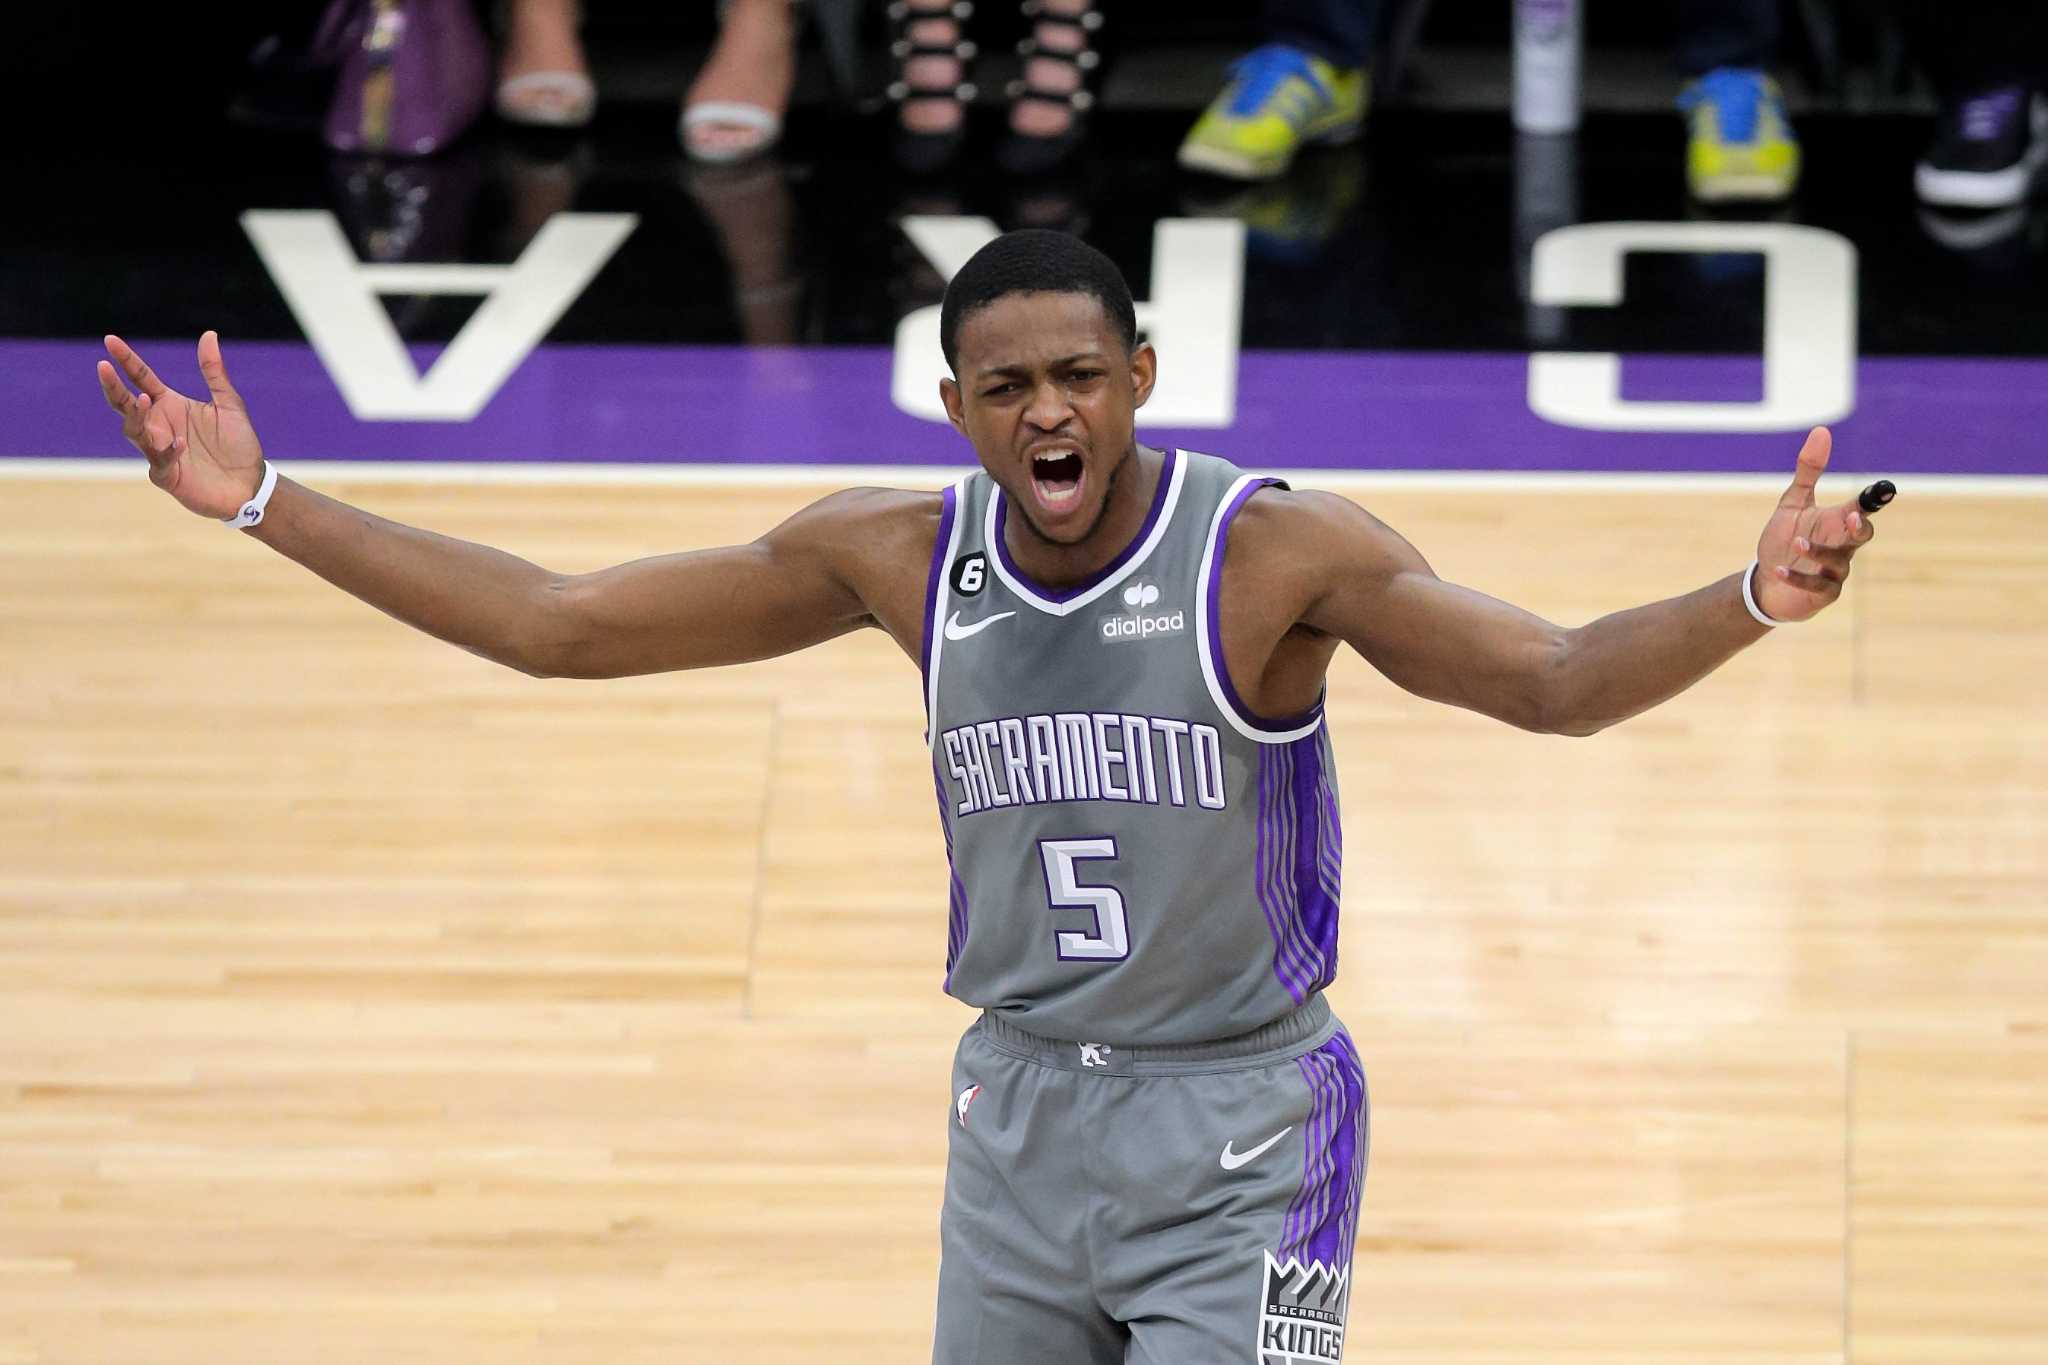 De'Aaron Fox to make the All-Star Game?